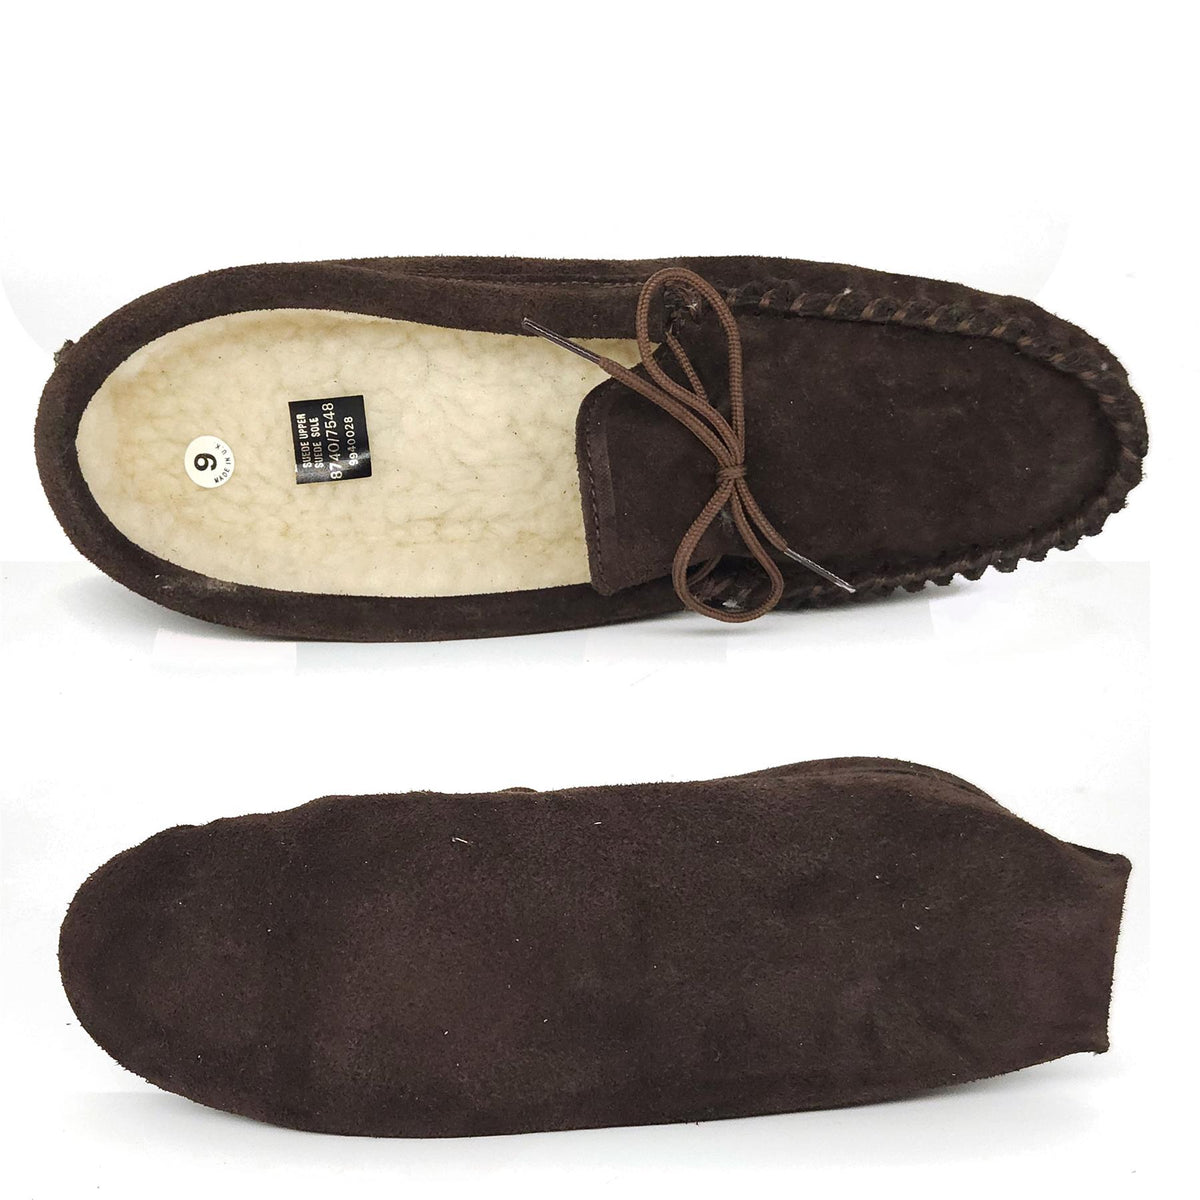 Coopers Suede Fleece Lined Soft Sole Mens Moccasin Slippers Made In England